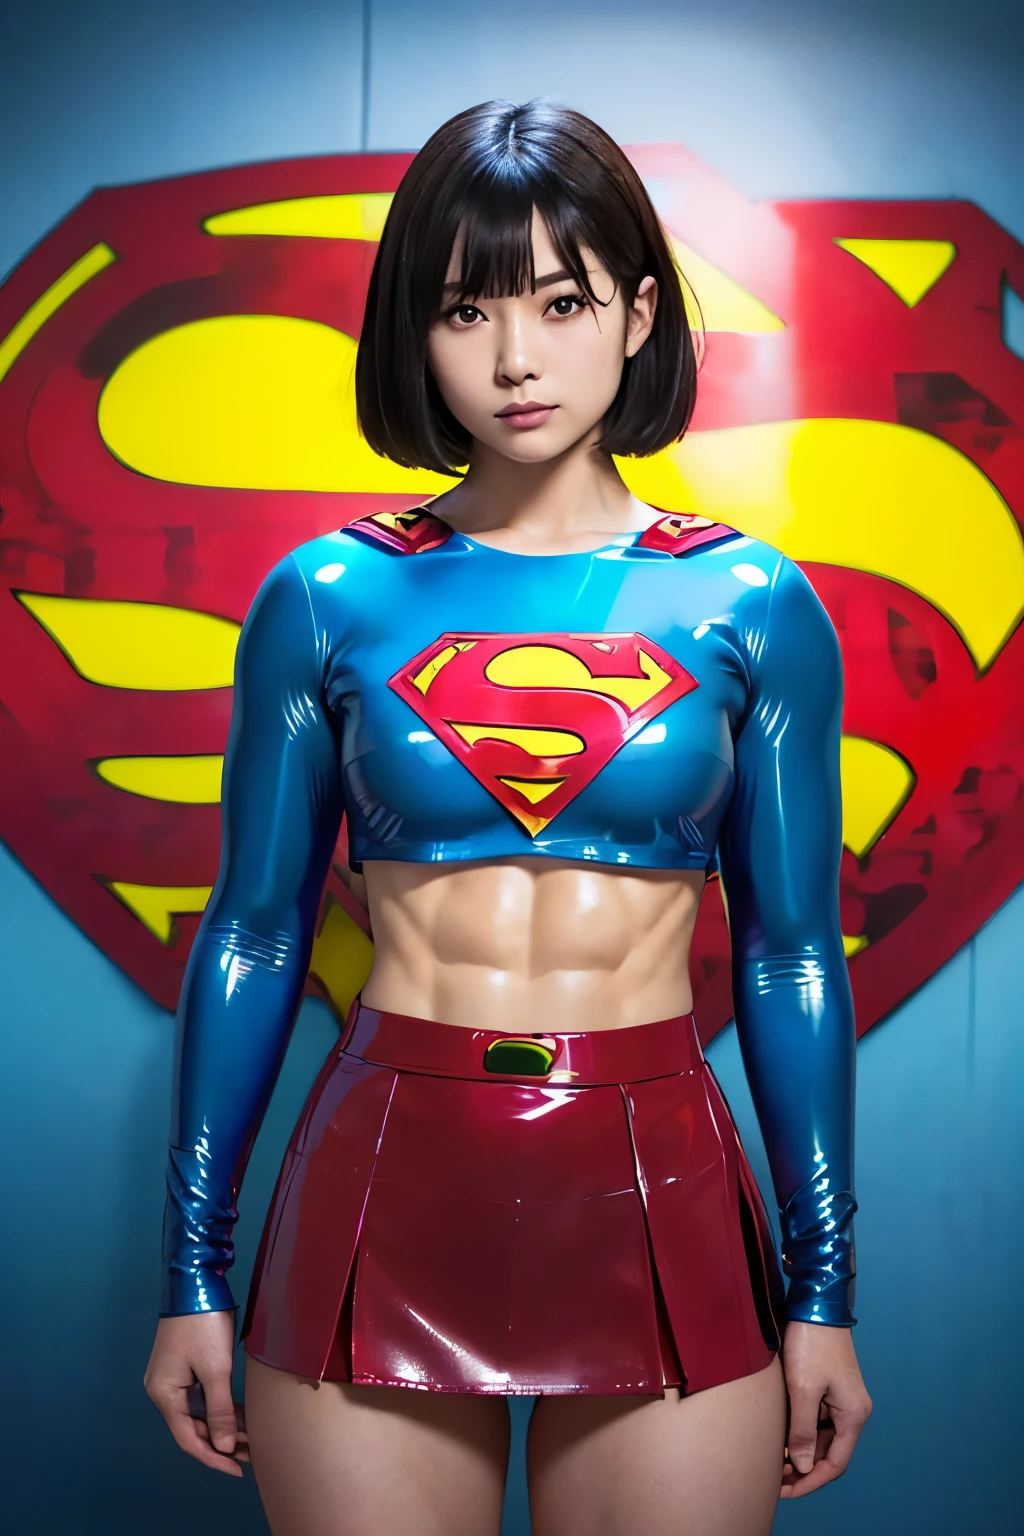 ((Highest quality)), ((masterpiece)), (Realistic details,Tabletop:1.0,High resolution:1.2,Realistic:1.4,8K, RAW Photos:1.2),(Very small breasted Japanese women:1.25), Beautiful, symmetrical single eyelids:1.22,18-year-old idol face with simple and beautiful light Ulzzang makeup:1.2,(Beautiful medium-short black hair with bangs:1.3),Thin and slightly pale eyebrows,(Detailed fair skin:1.2),((A bright and busy intersection:1.4,Bokeh:1.25)),((Frontal head to knee cowboy shot:1.2)),(Bodybuilding Poses:1.18),Spotlight from below:1.3,(((A super tight, super short cropped long sleeve top in shiny blue latex with a Superman S on her very small chest, showing off her abs:1.58,Shiny red latex fabric super short skirt:1.65))),((Very small breasts:1.8)), (((Very slender, very skinny model body:1.85))),(Short torso:1.38),(Broad shoulders:1.3),(Narrow waist:1.45),(Trained little buttocks:1.23),(Muscular limbs:1.32),(Very thin thighs:1.52),(The hip bones are visible:1.42),((Fine abdominal muscles:1.72)),(The groin is visible:1.4)
